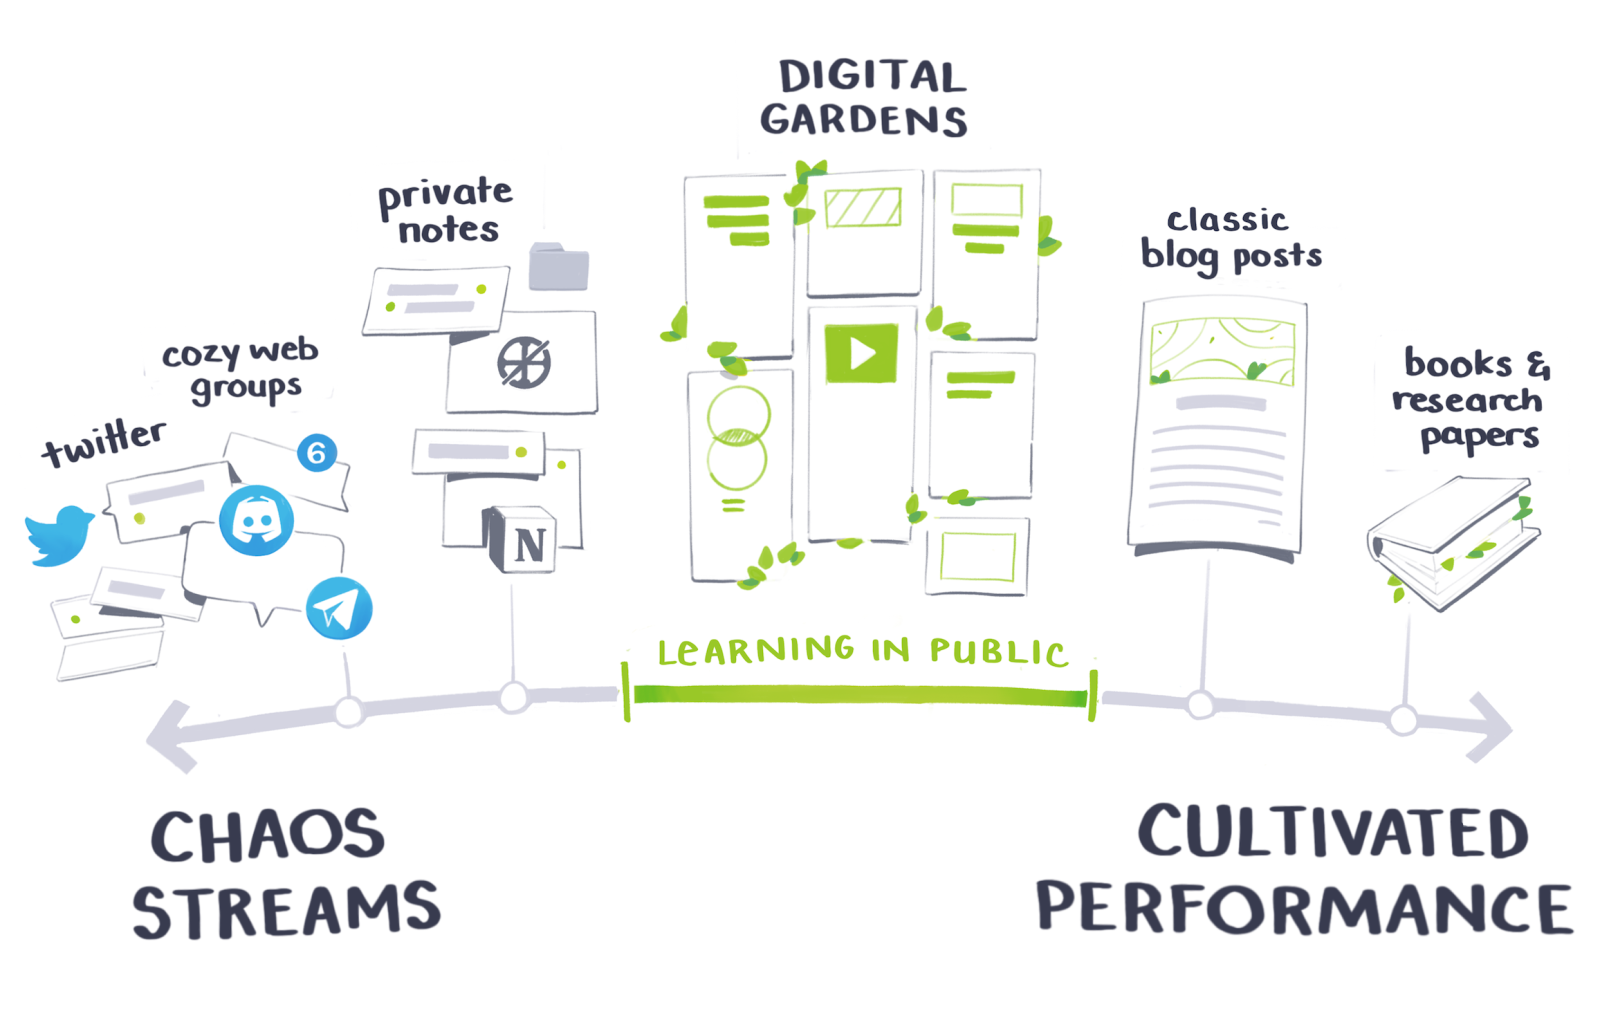 Timeline of knowledge from chaos stream to cultivated performance. The continuum includes: social media, private notes, digital gardens, to classic blog posts, to book and research papers